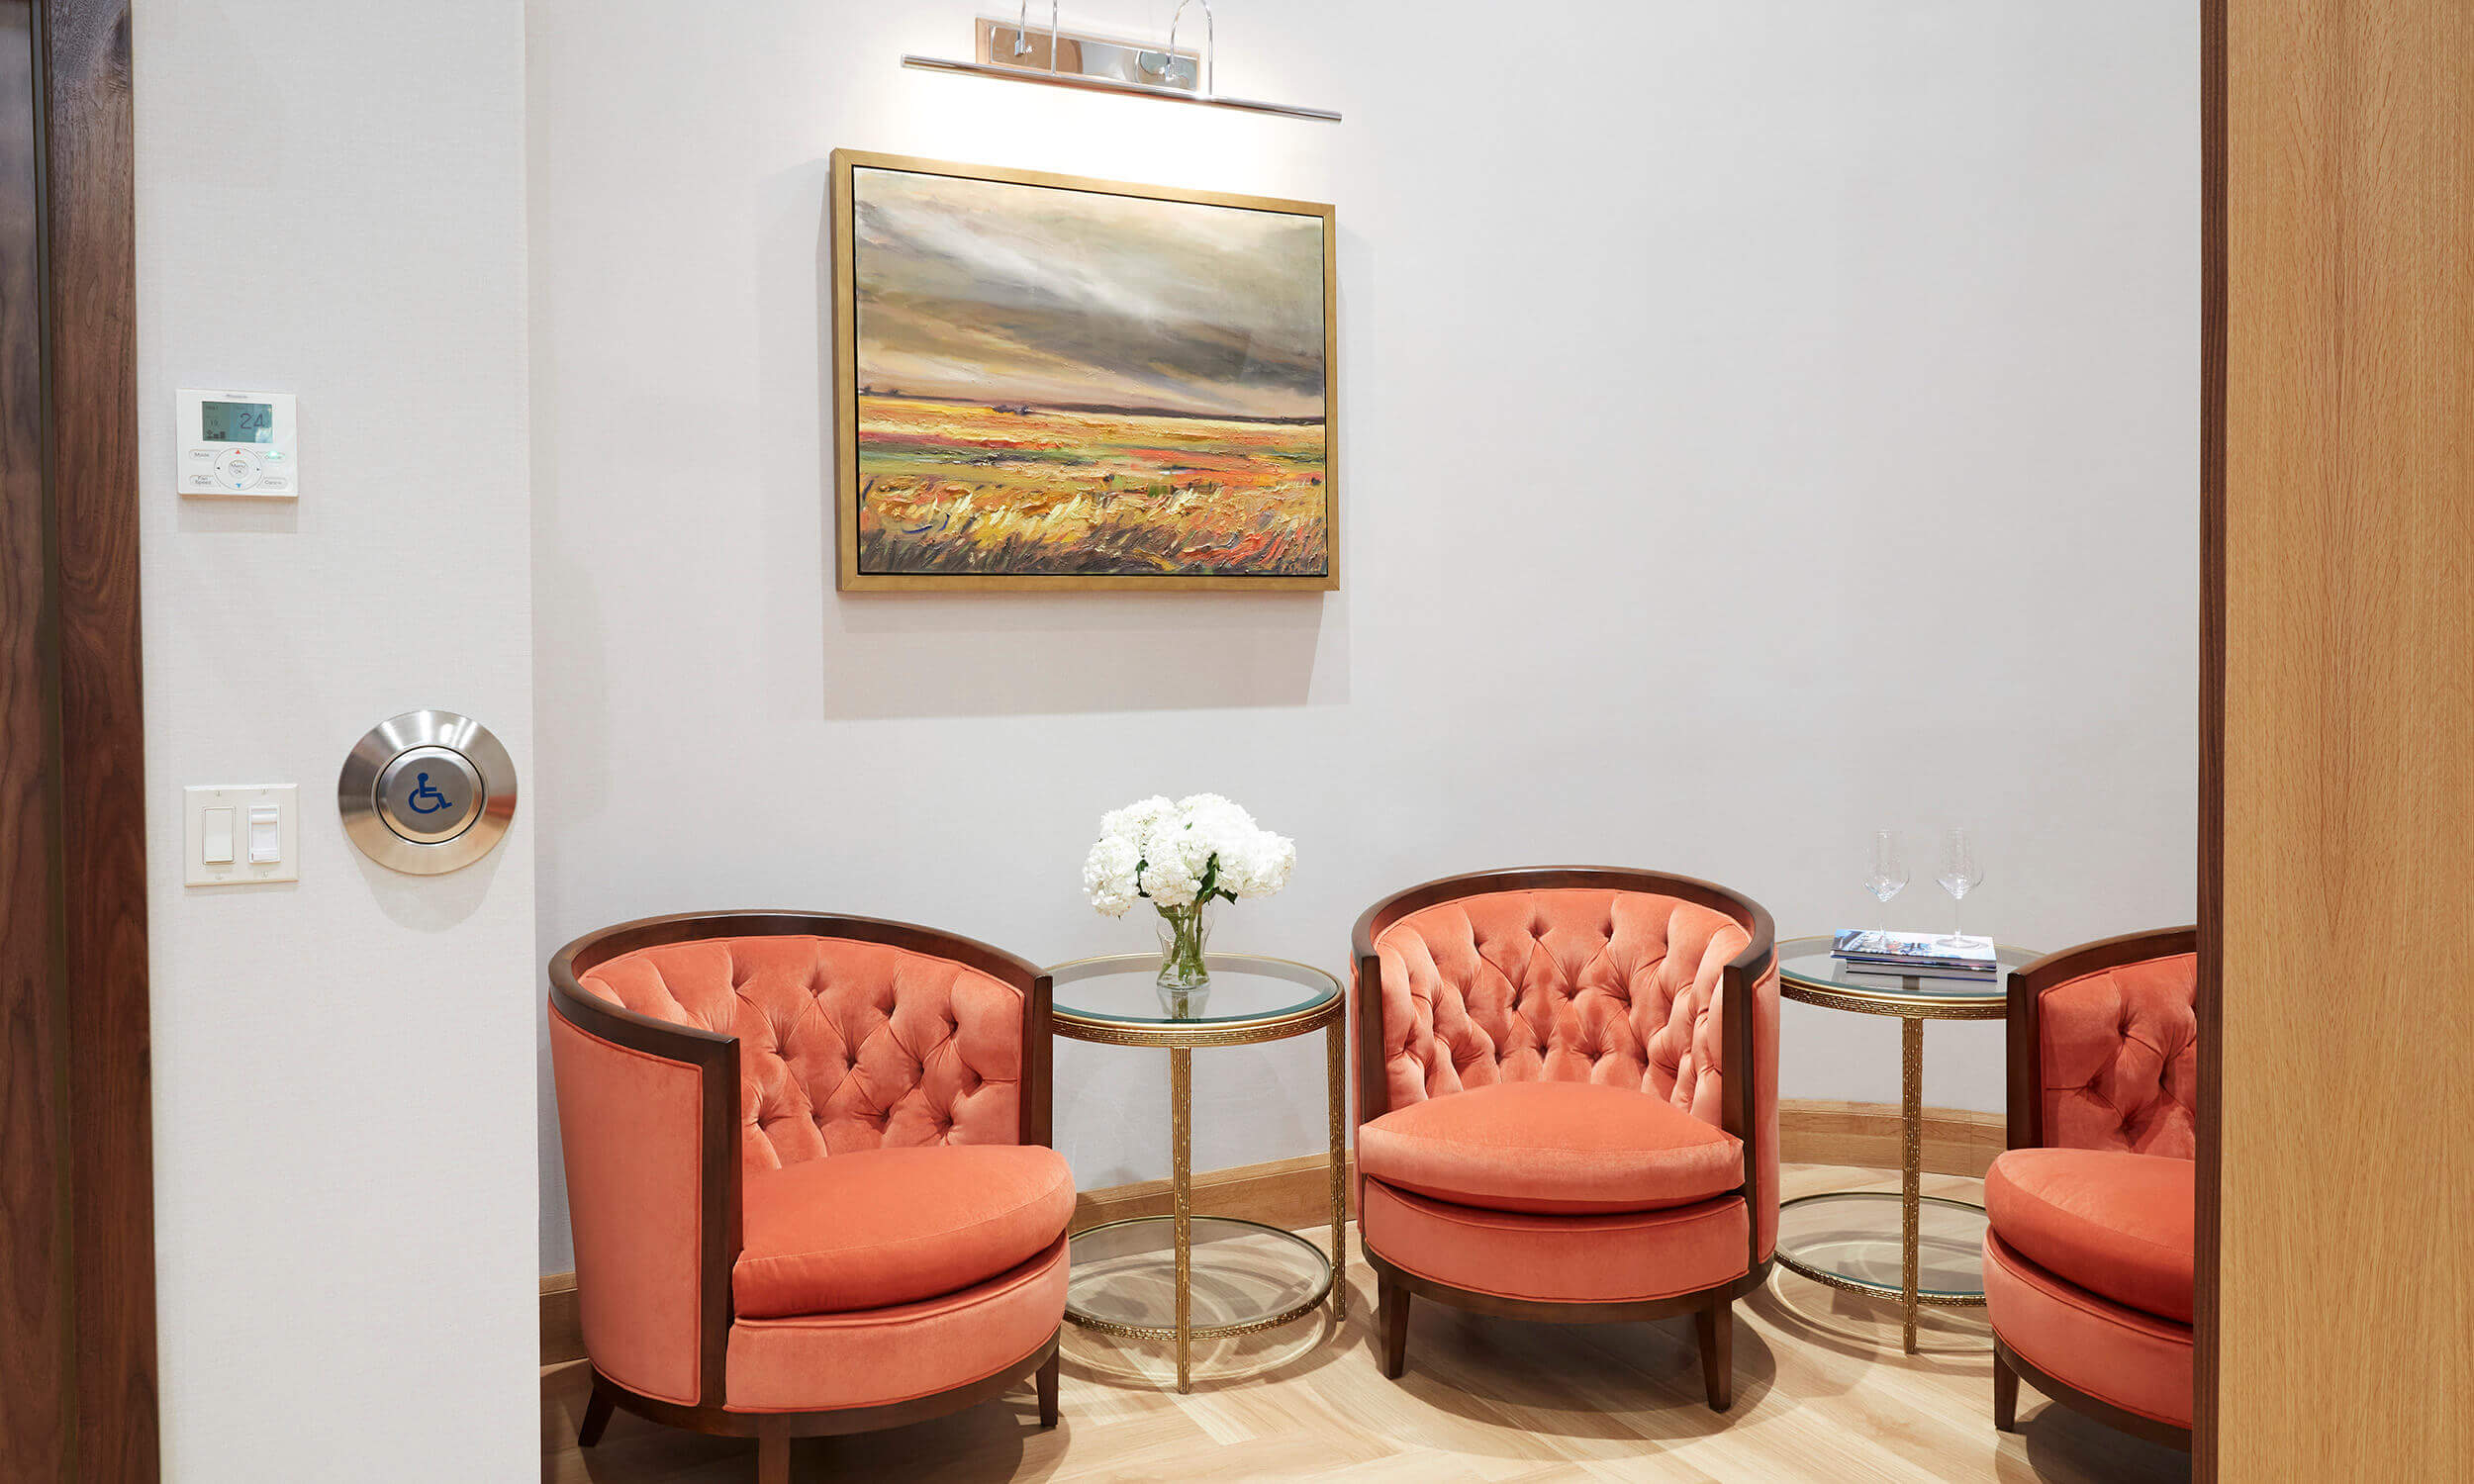 Waiting room in retirement home with three orange plush chairs with small tables between and landscape painting on wall